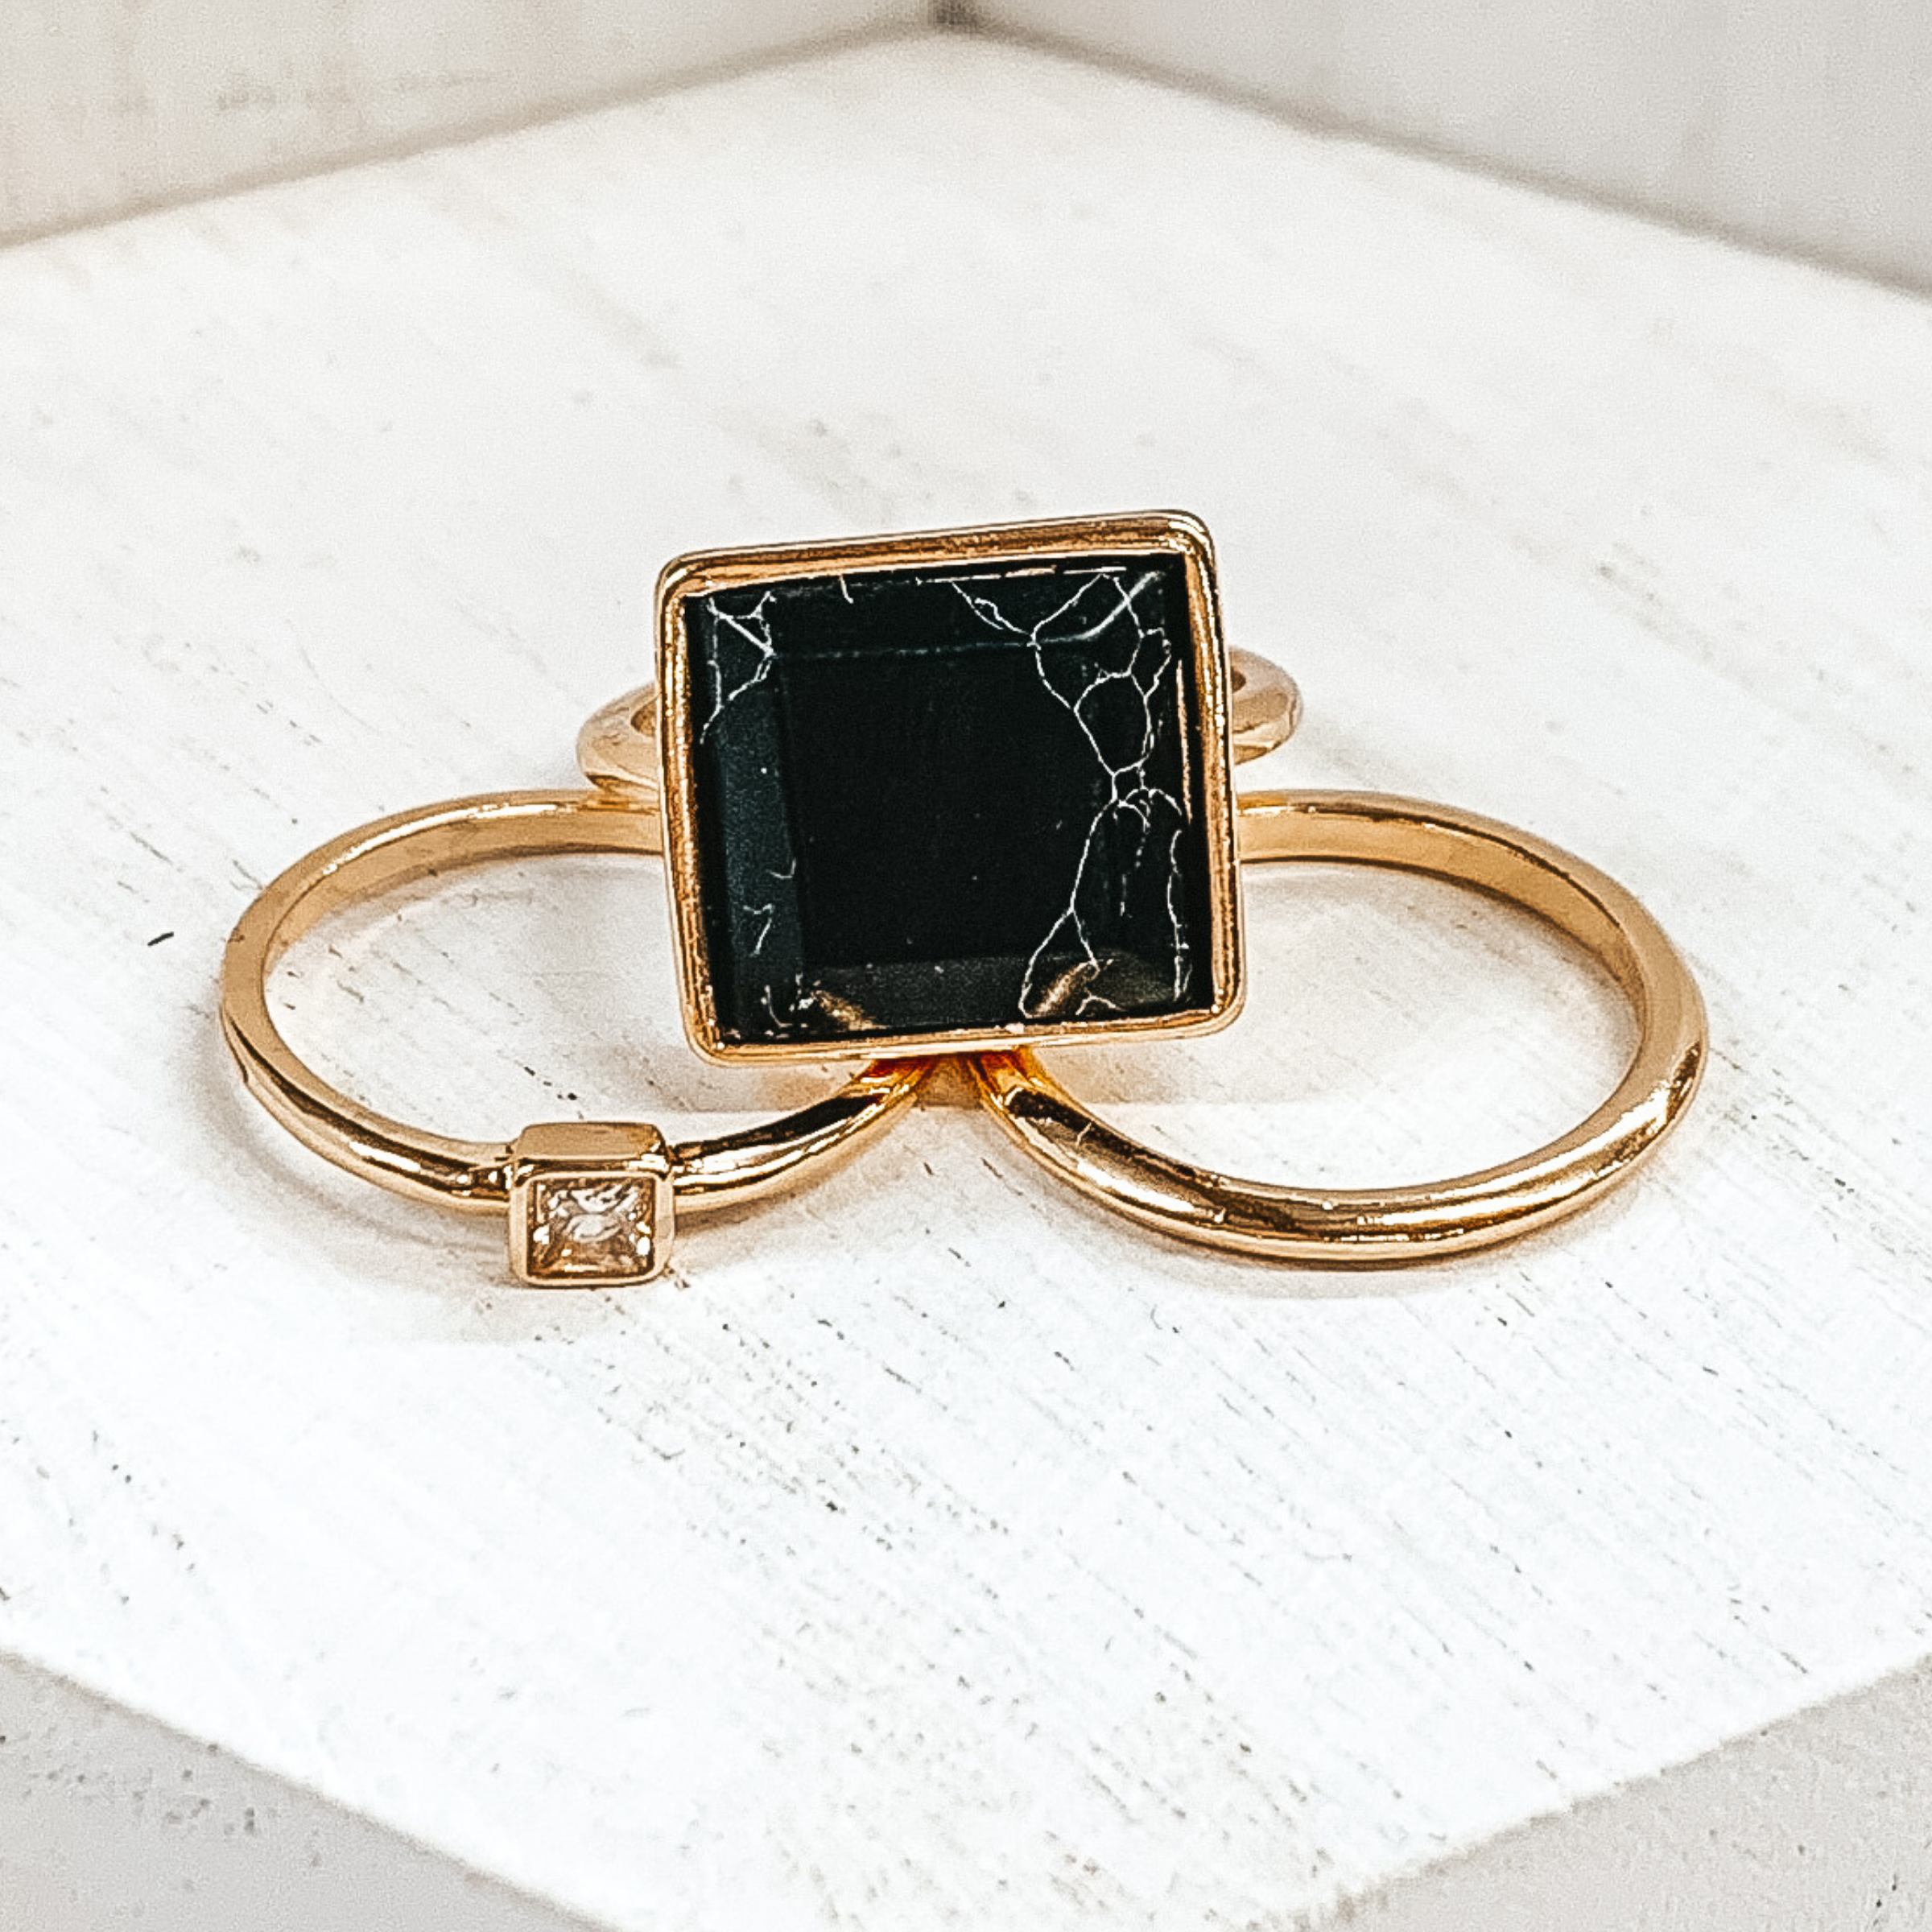 Set of three gold rings. One ring is a plain gold band. Another has a small square pendant with a center crystal. The third ring has a big, black pendant. These rings are pictured on a white background.  